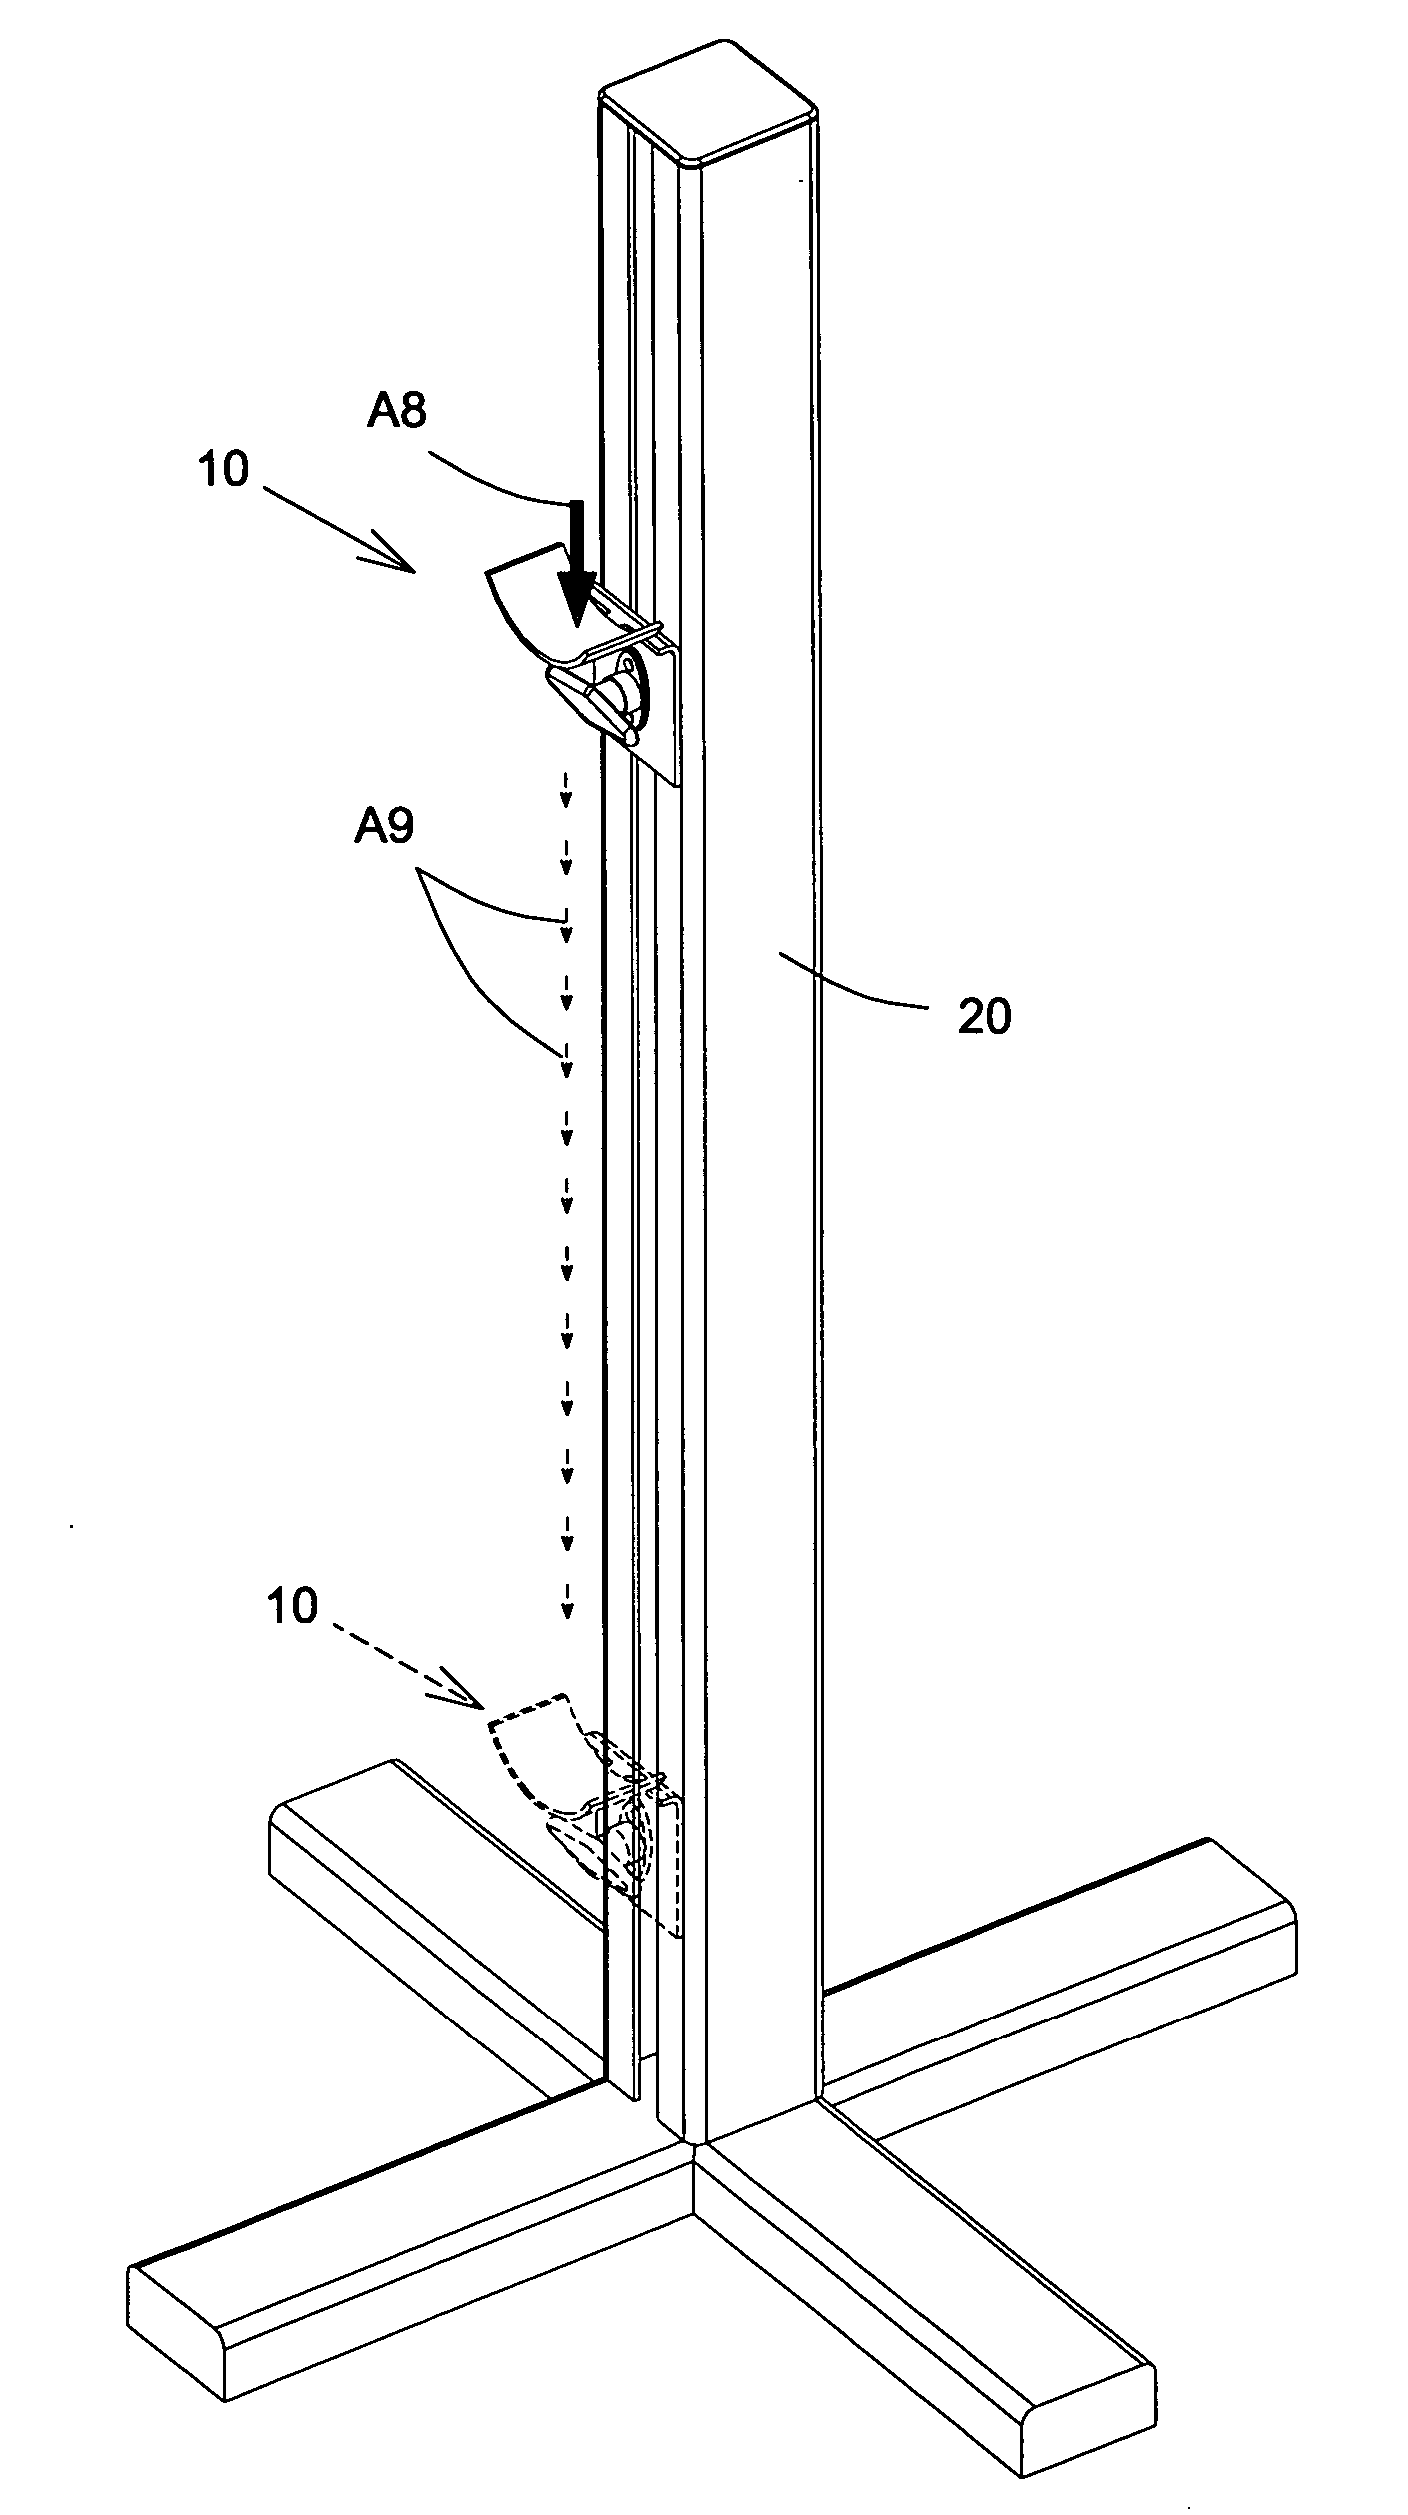 Continuously height-adjustable jump cup attachment bracket and safety feature mechanism